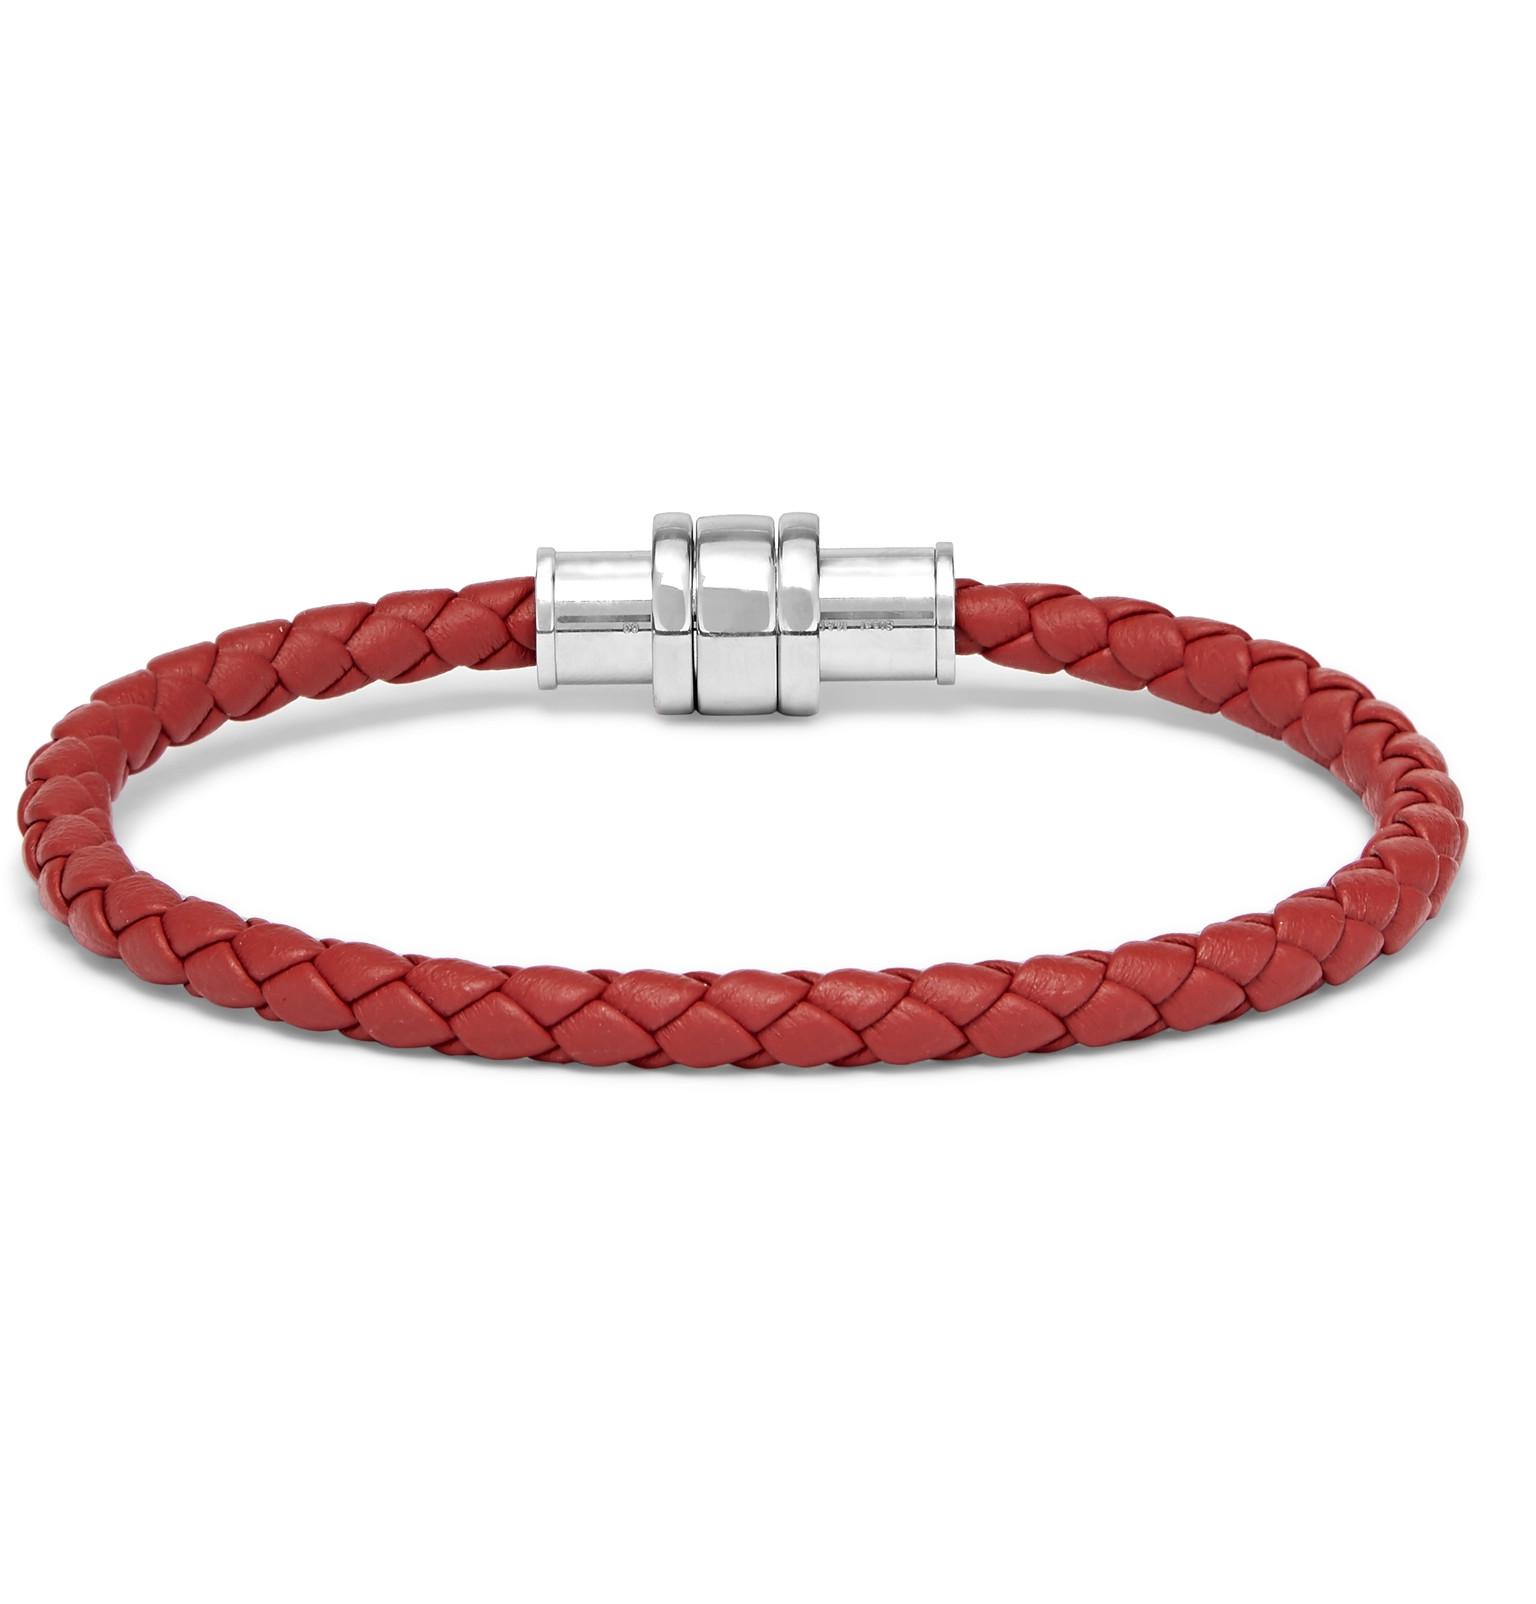 Montblanc Meisterstück Braided Leather And Stainless Steel 